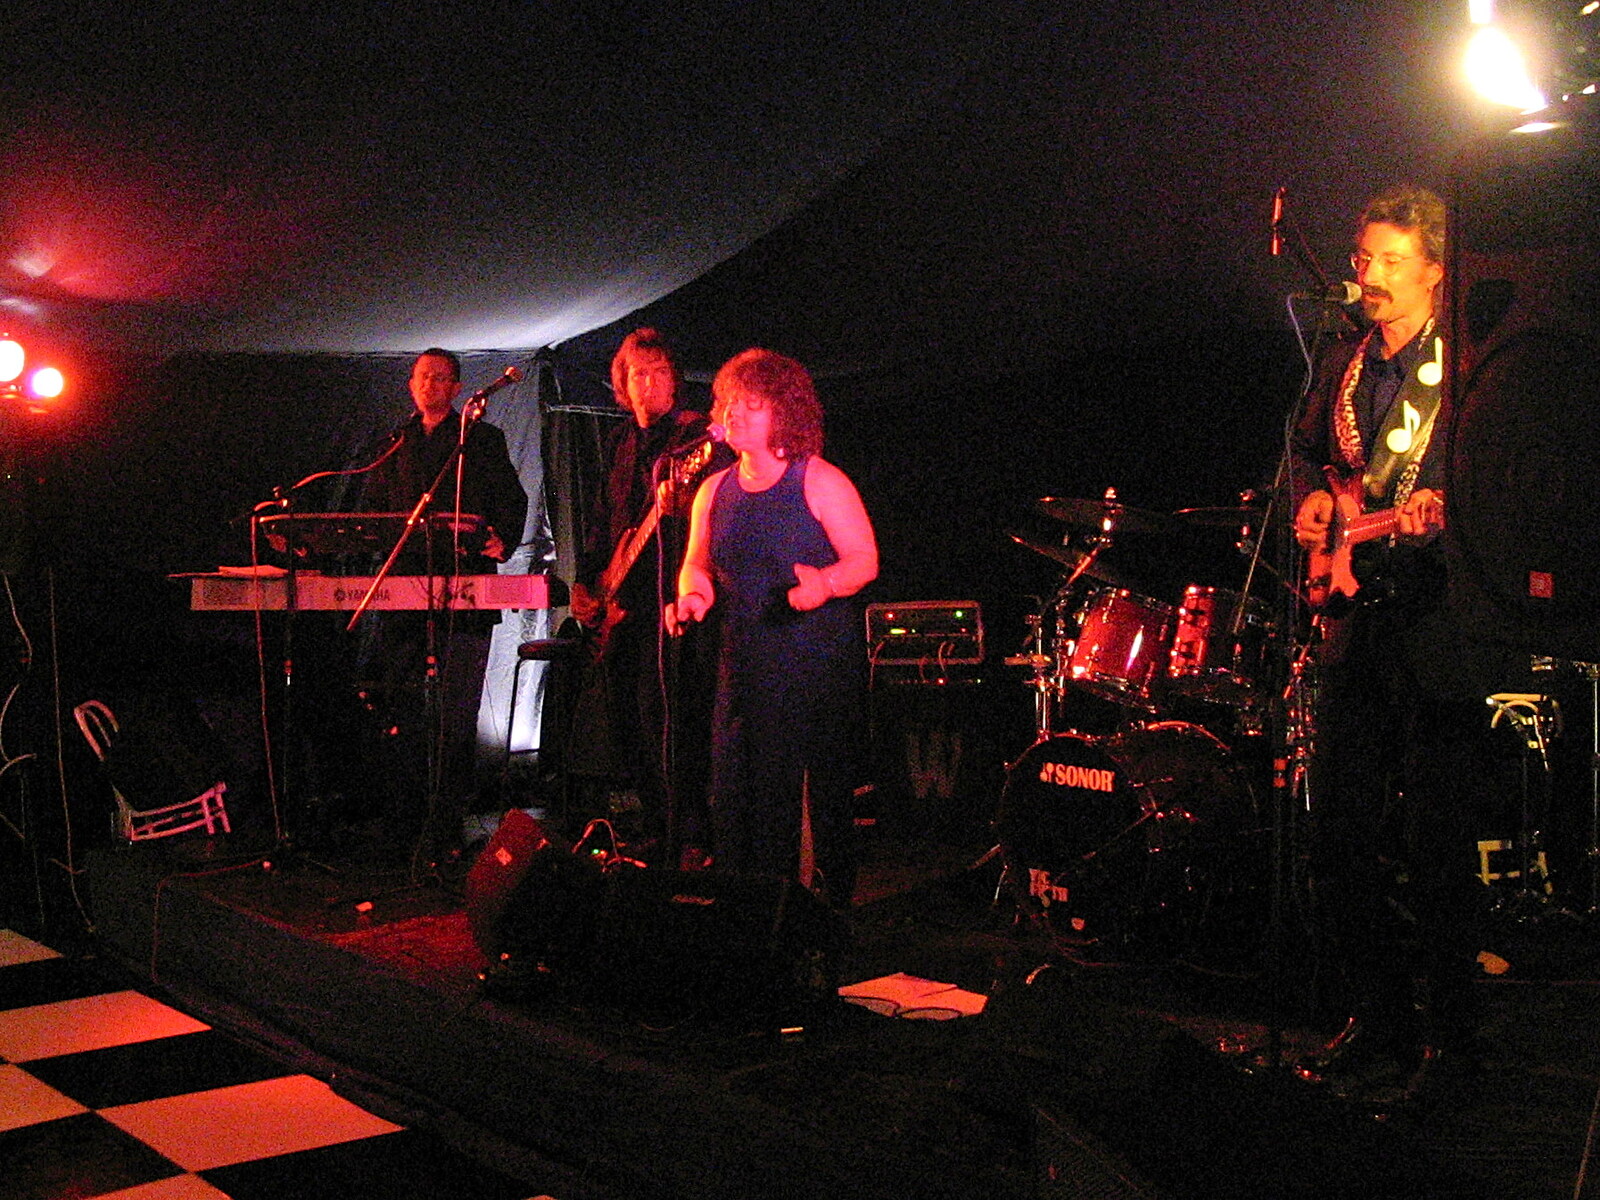 The BBs are on stage from The BBs Play Bressingham, Norfolk - 3rd September 2005